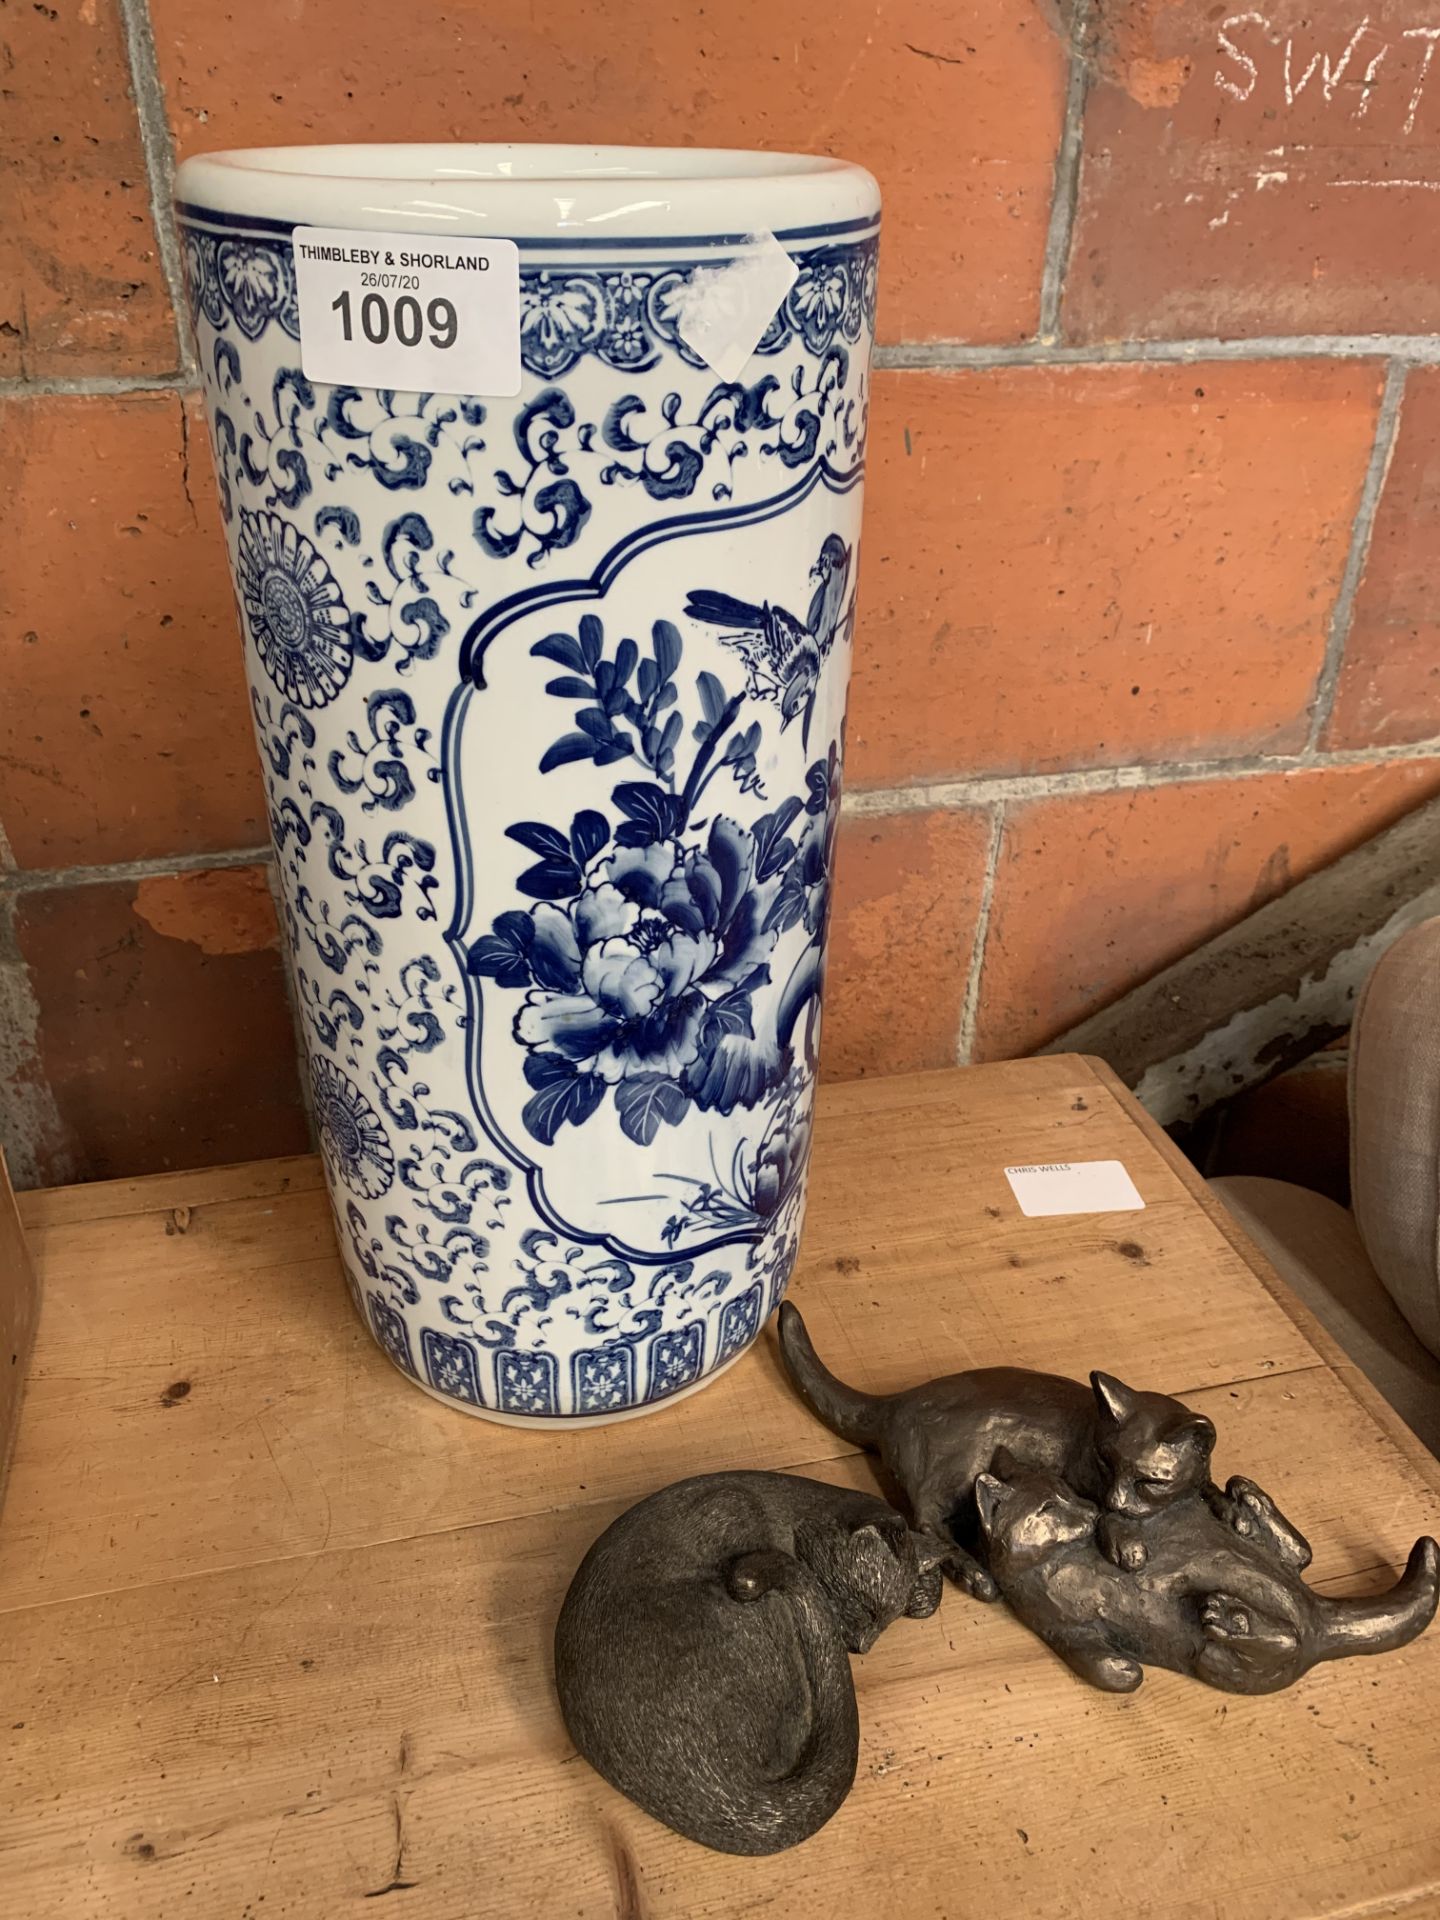 Blue and white china oriental umbrella stand and 2 Frith sculptures created by Paul Jenkins.